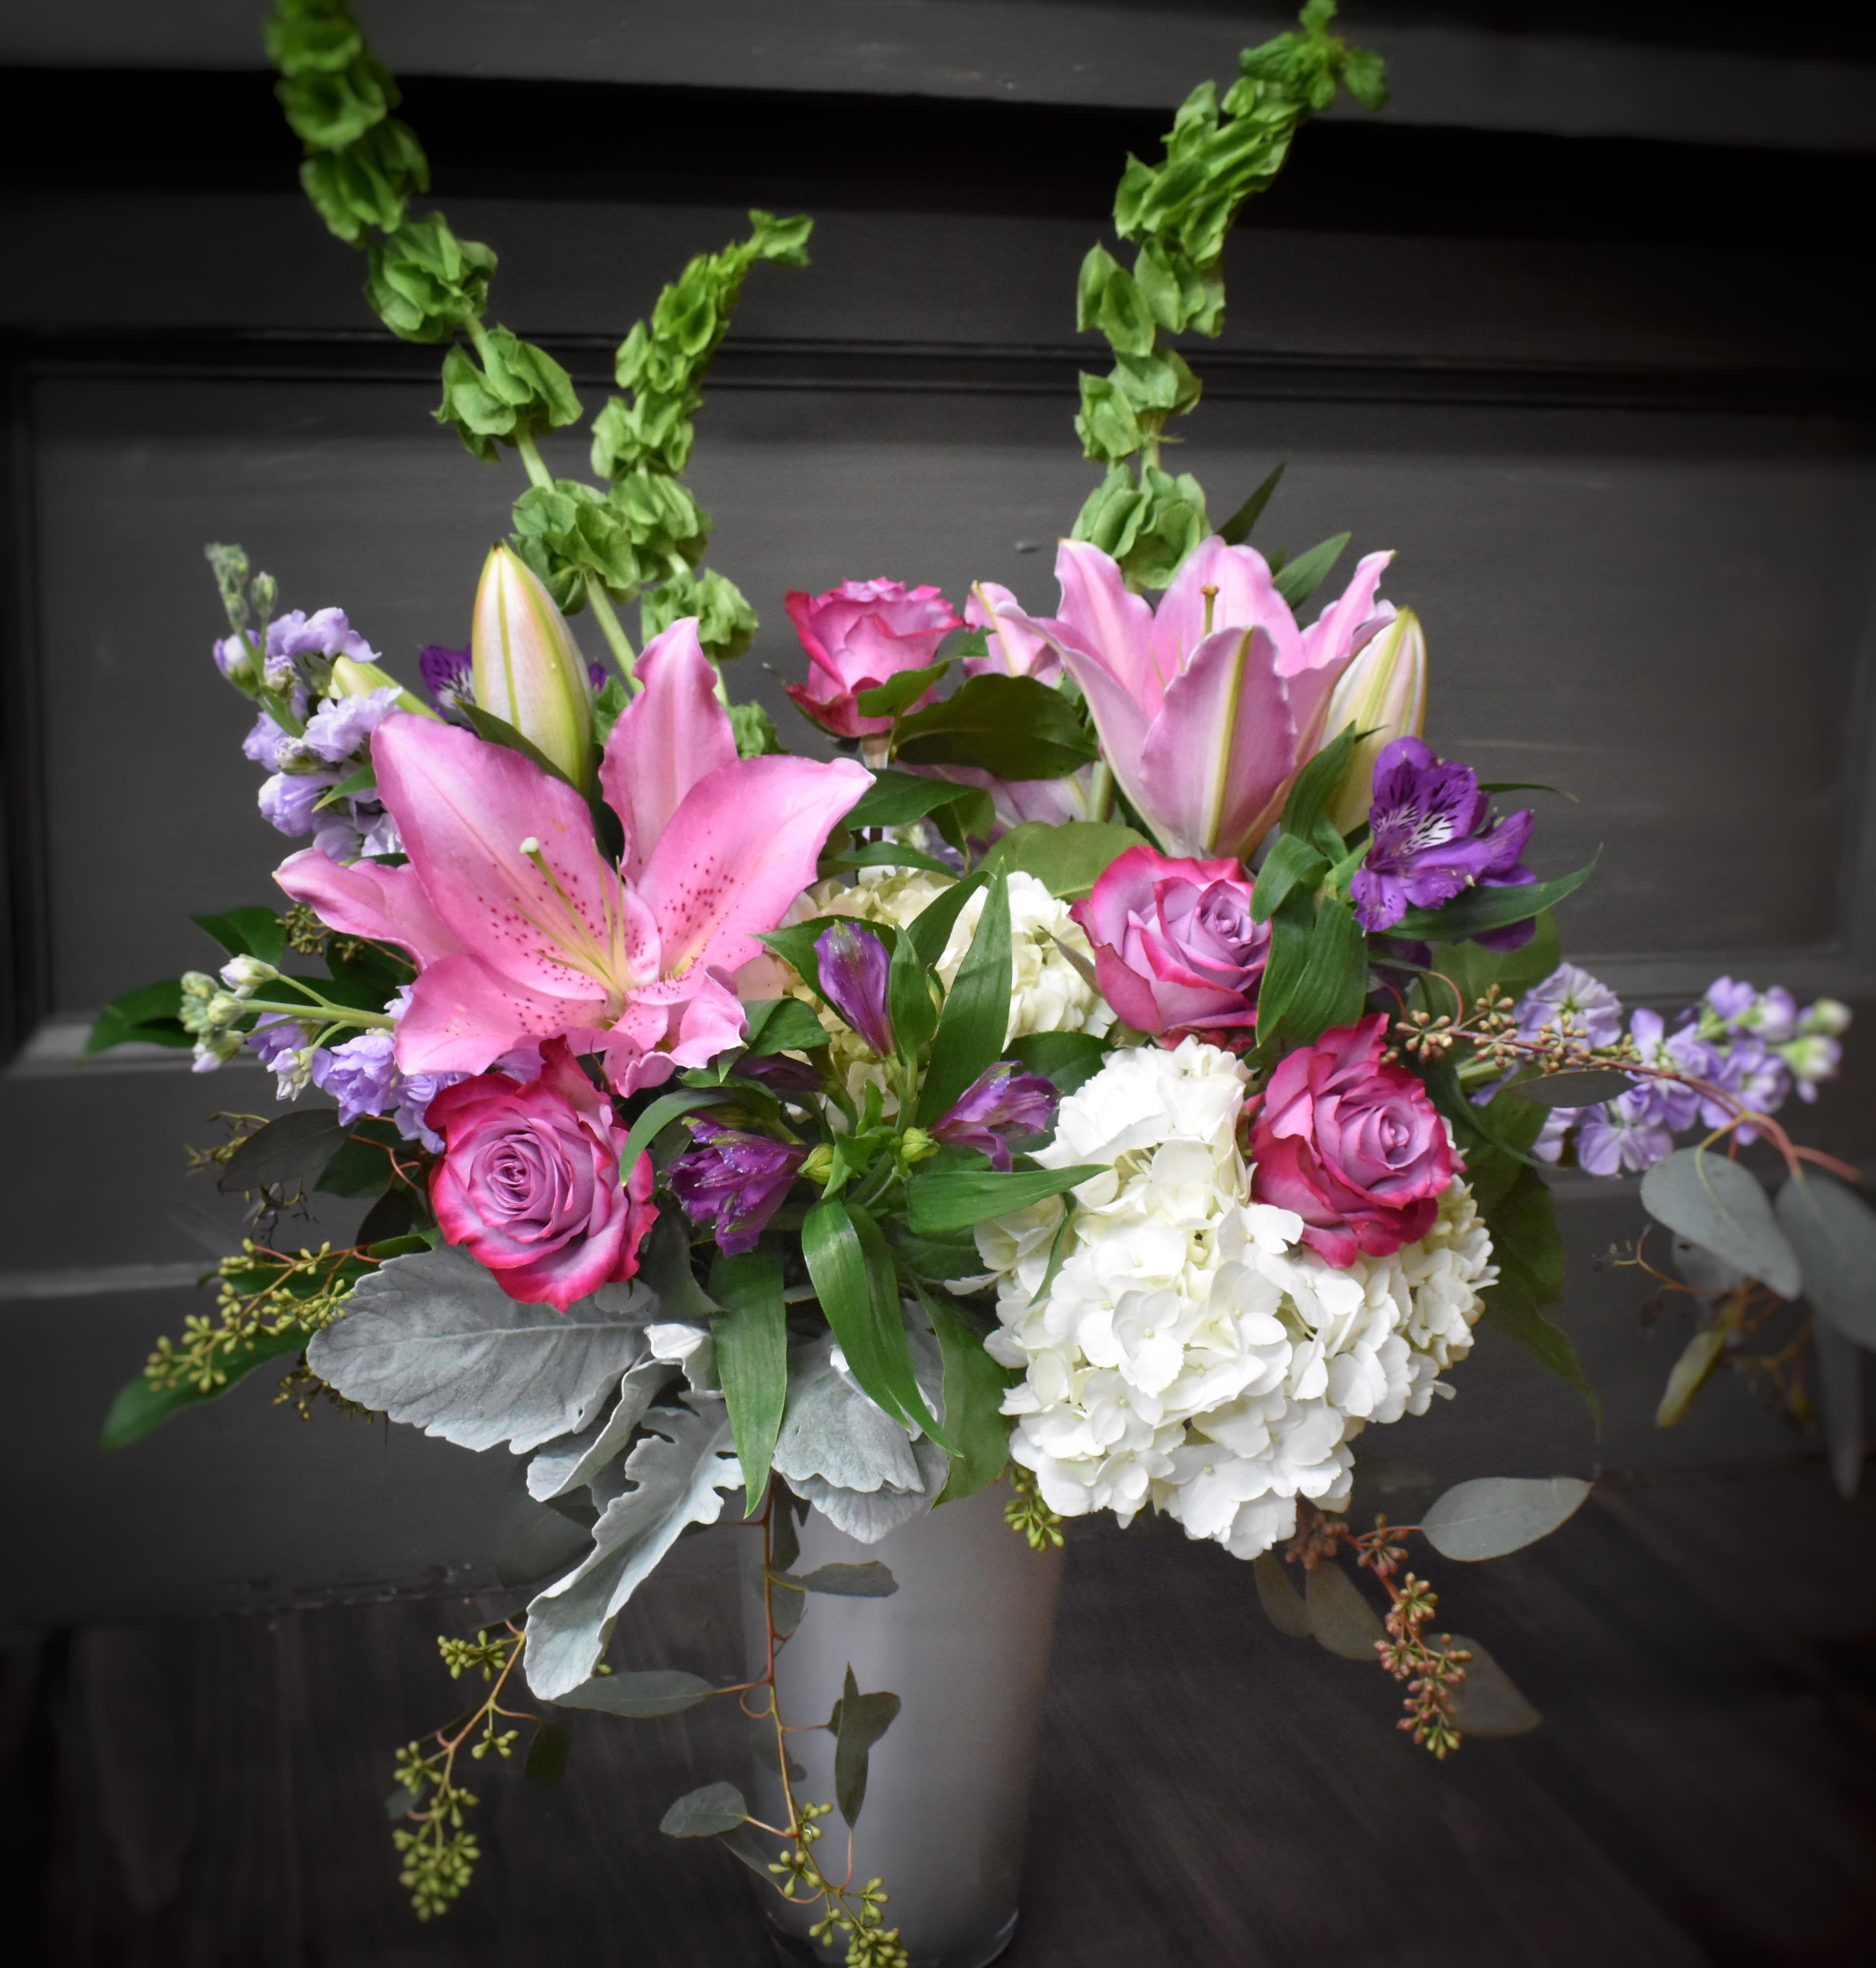 Best Mom In The World - Delivered in an elegant silver tone colored glass vase, is a grouping of beautiful flowers in shades of purple, lavender and pink.  Always a favorite color palette.